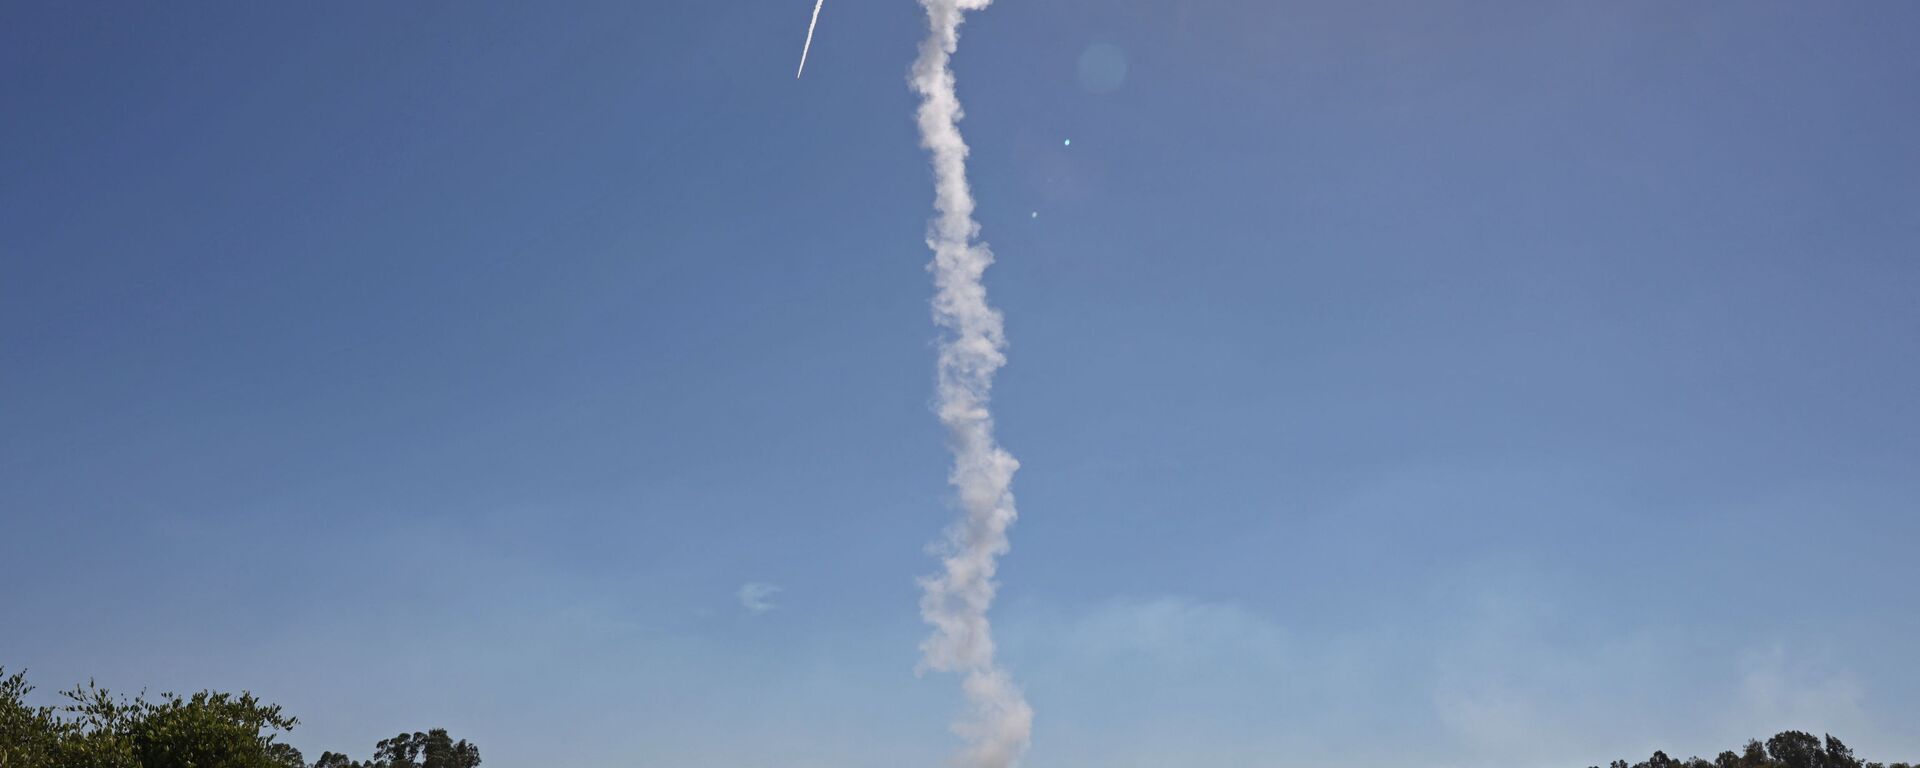 Israel's Iron Dome aerial defence system is launched to intercept rockets launched from the Gaza Strip, above the southern Israeli city of Sderot, on May 18, 2021. - Sputnik International, 1920, 26.06.2022